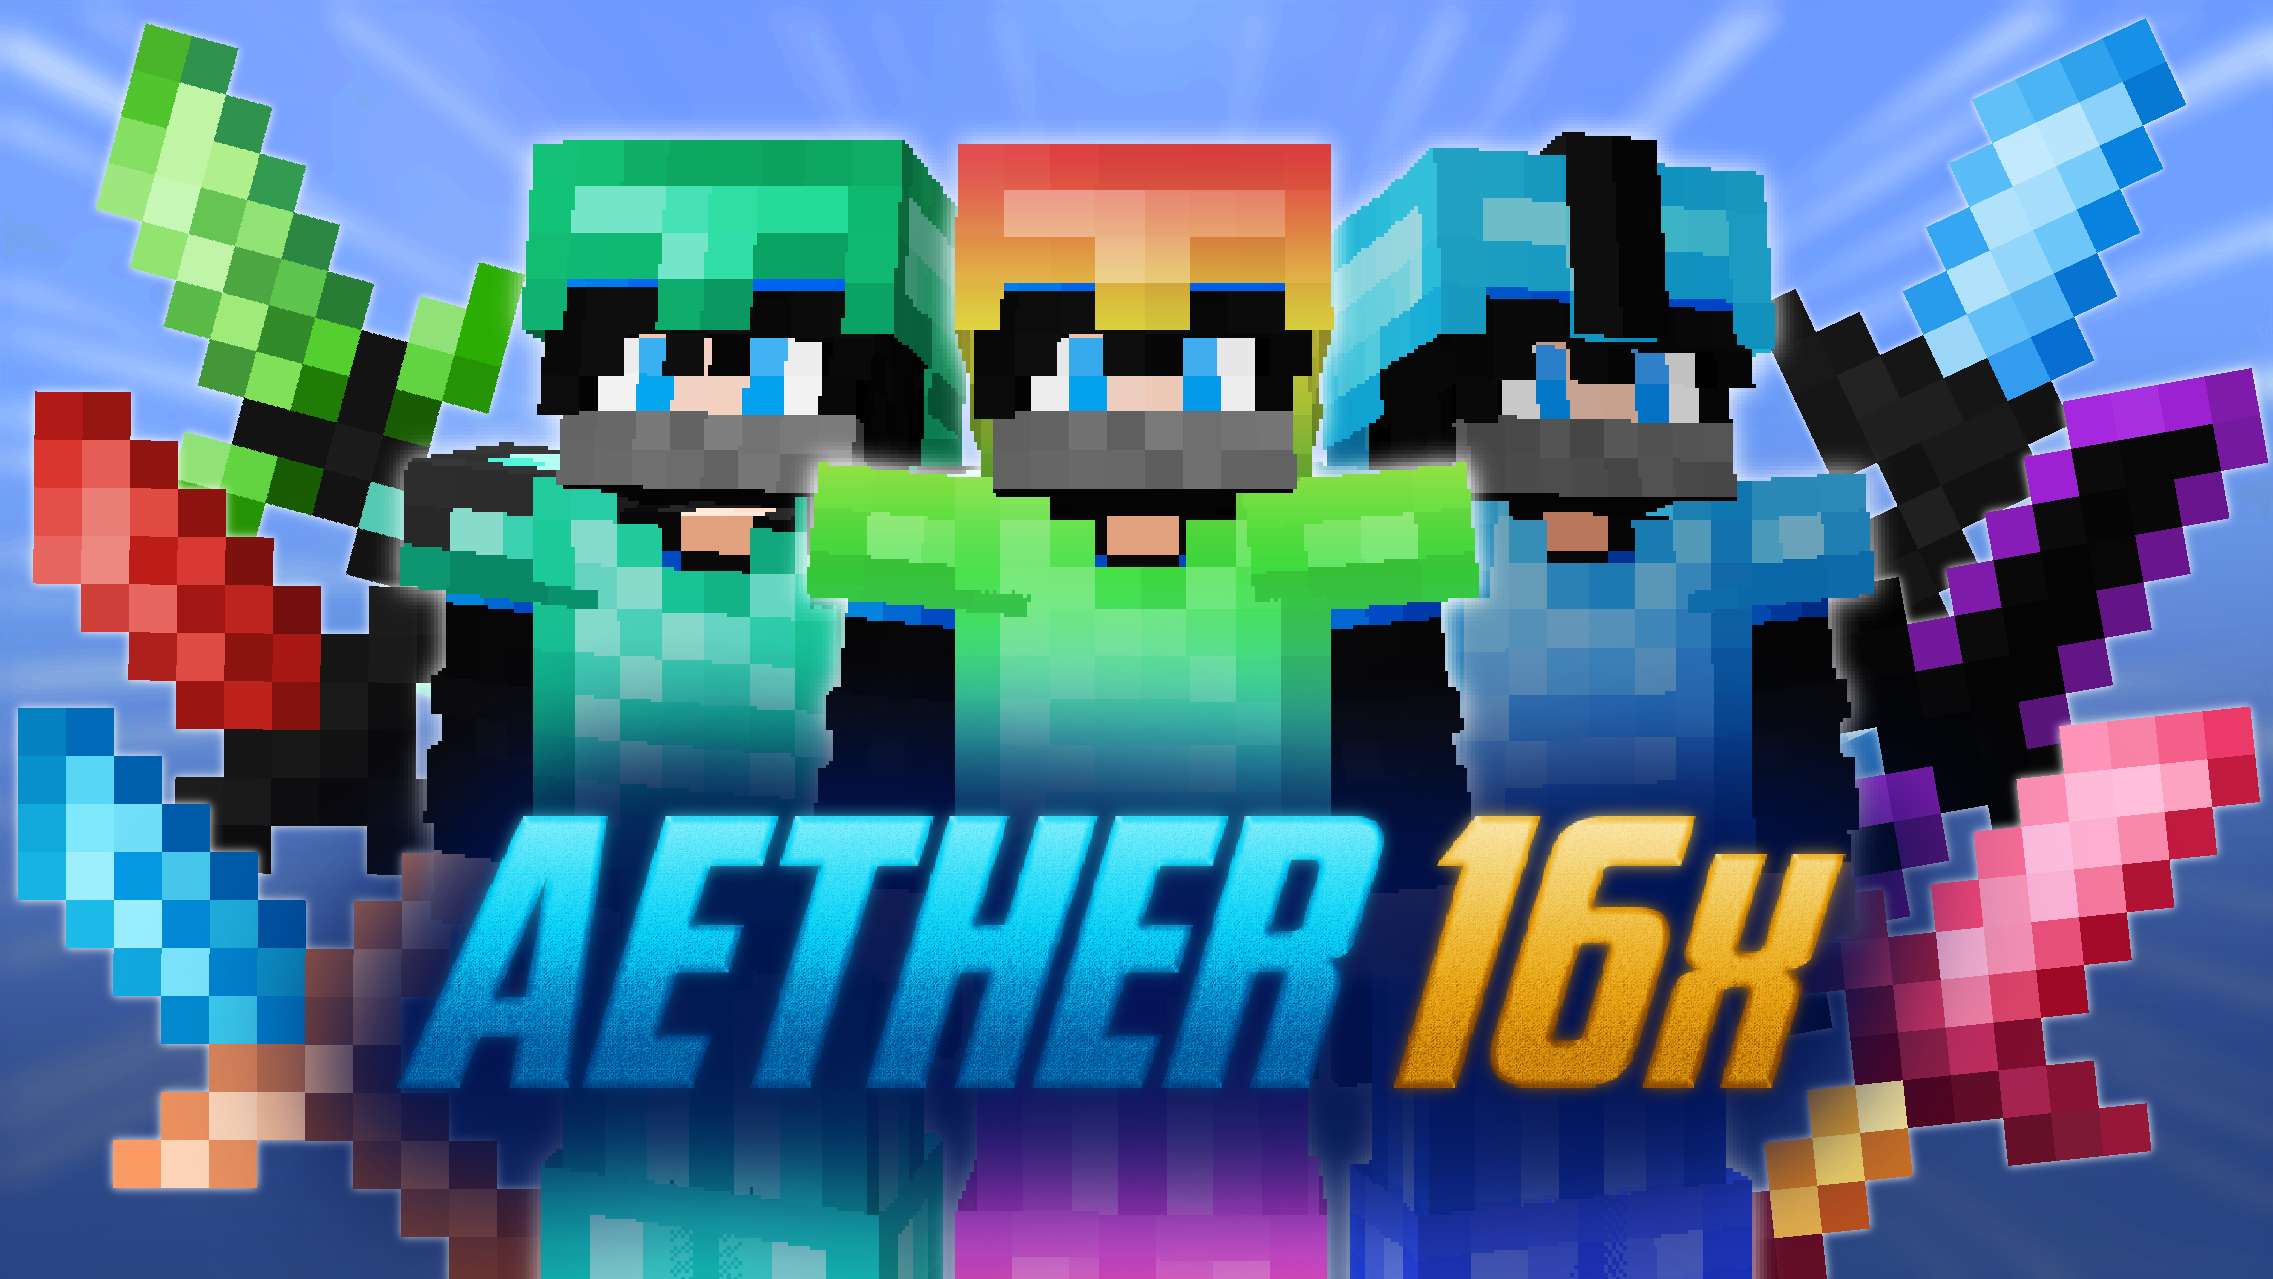 Aether  [sweatg0d] 16x by Mqryo on PvPRP